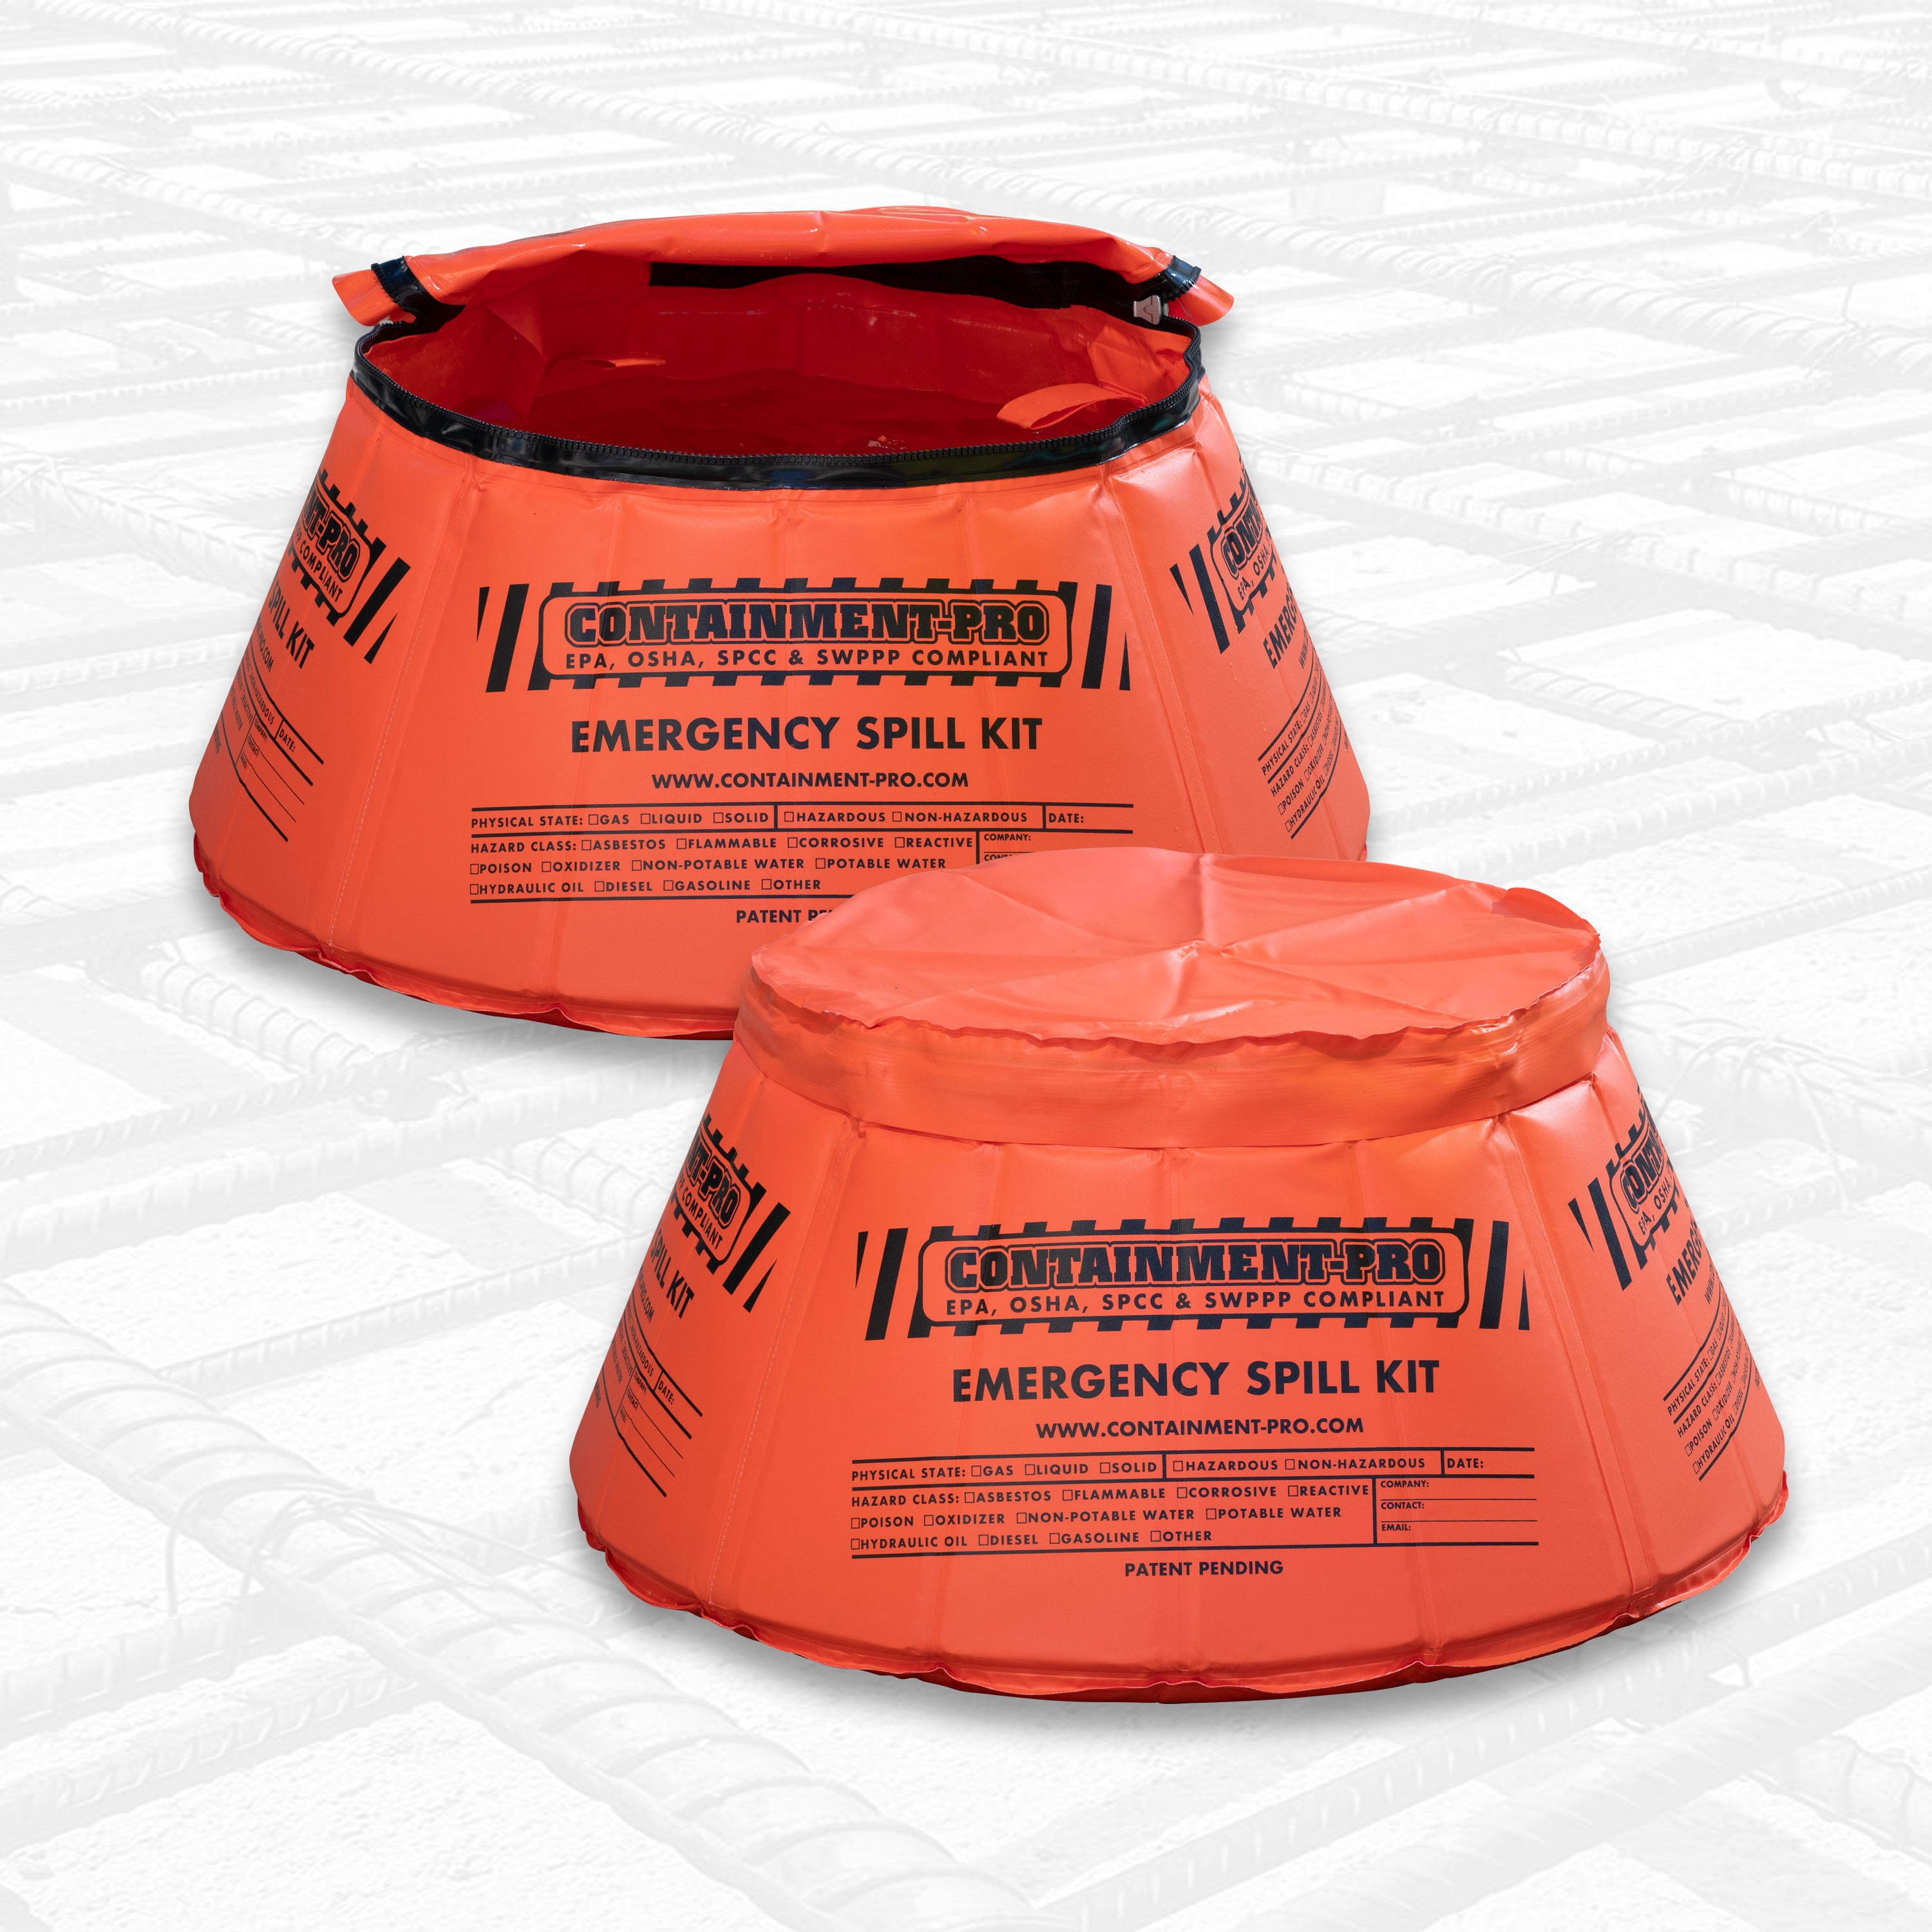 Leak Stopper™ designed for quick and safe, temporary leak containment